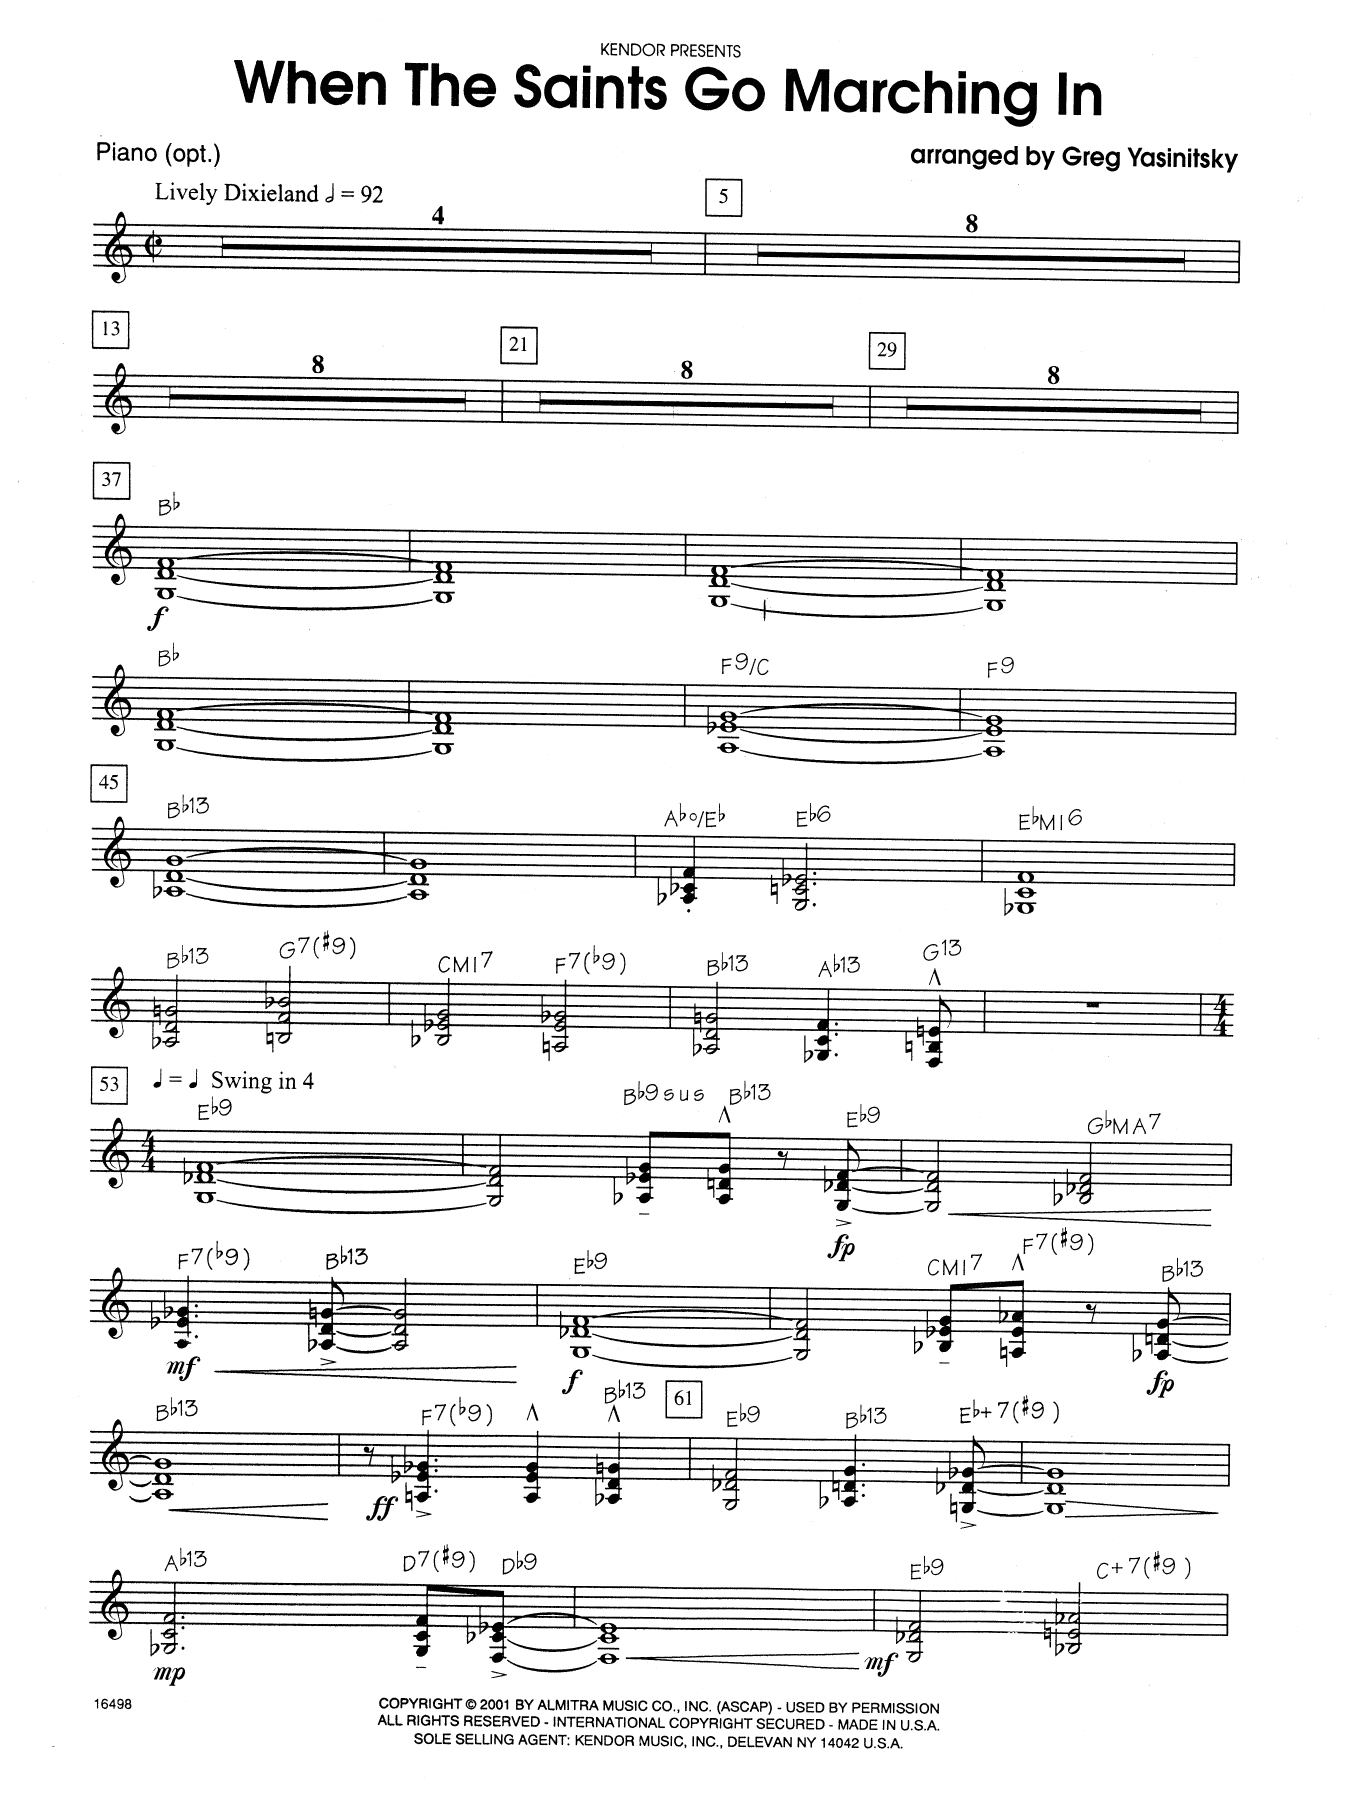 Download Gregory Yasinitsky When the Saints Go Marching In - Piano Sheet Music